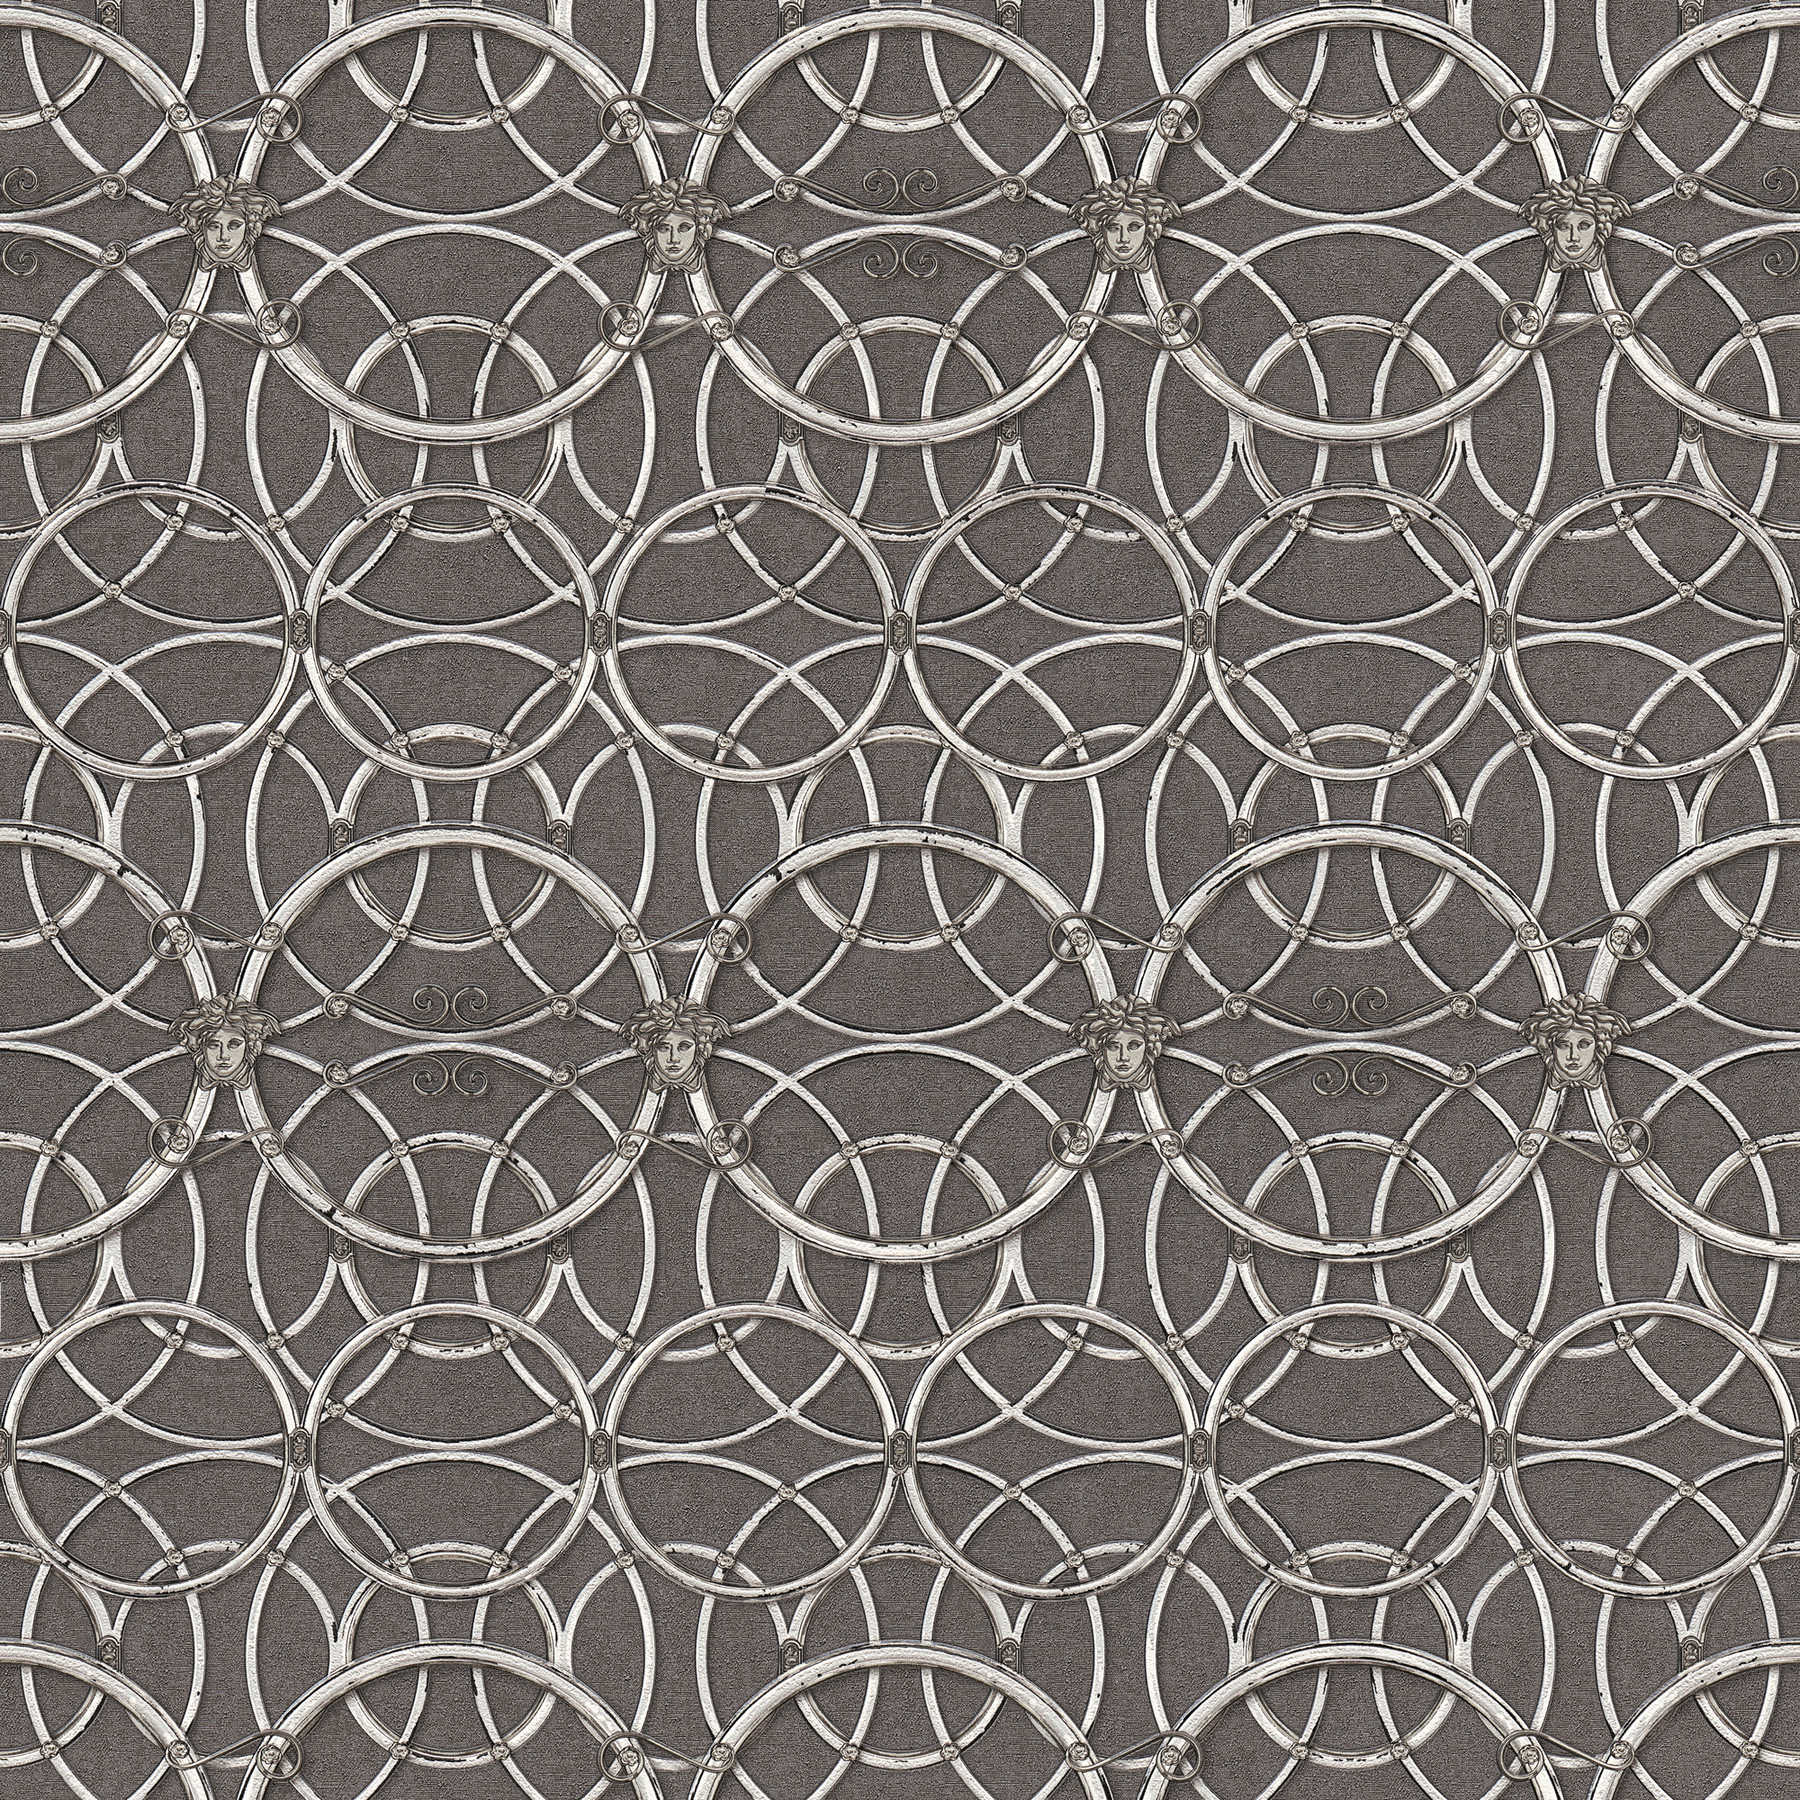         VERSACE Home wallpaper circle pattern and Medusa - silver, grey
    